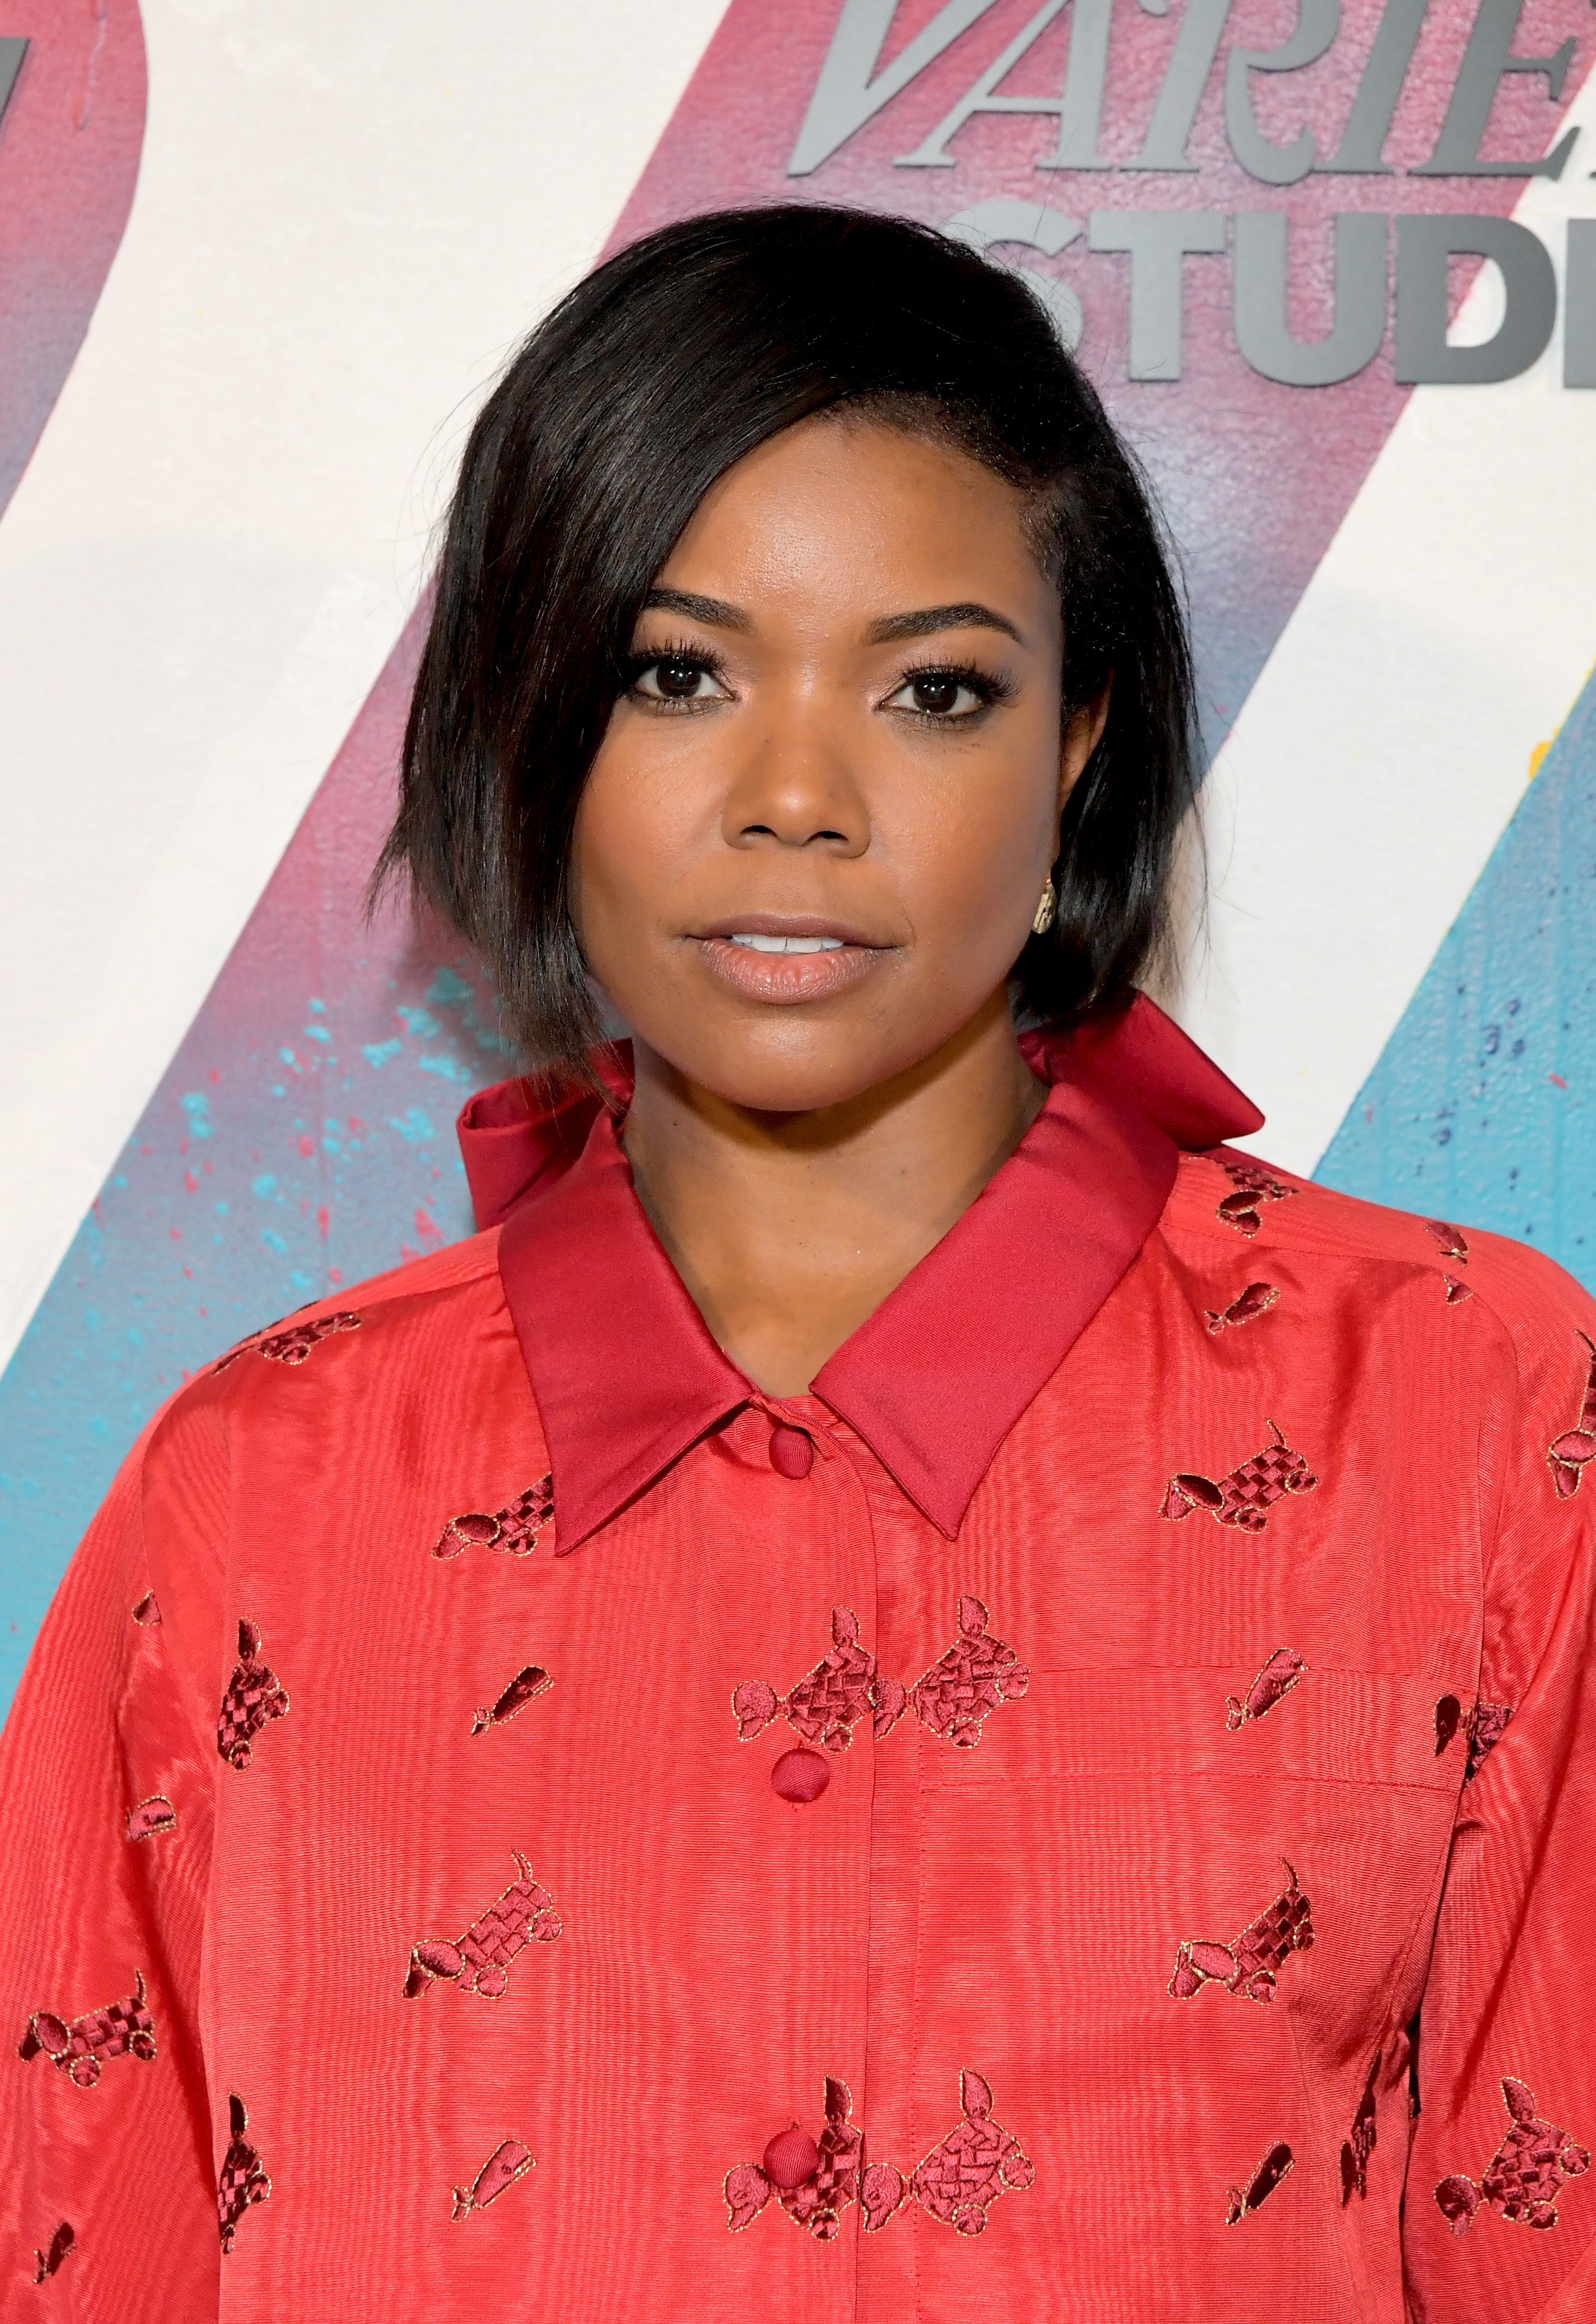 Gabrielle Union poses in a red shirt with floral embroidery at an event